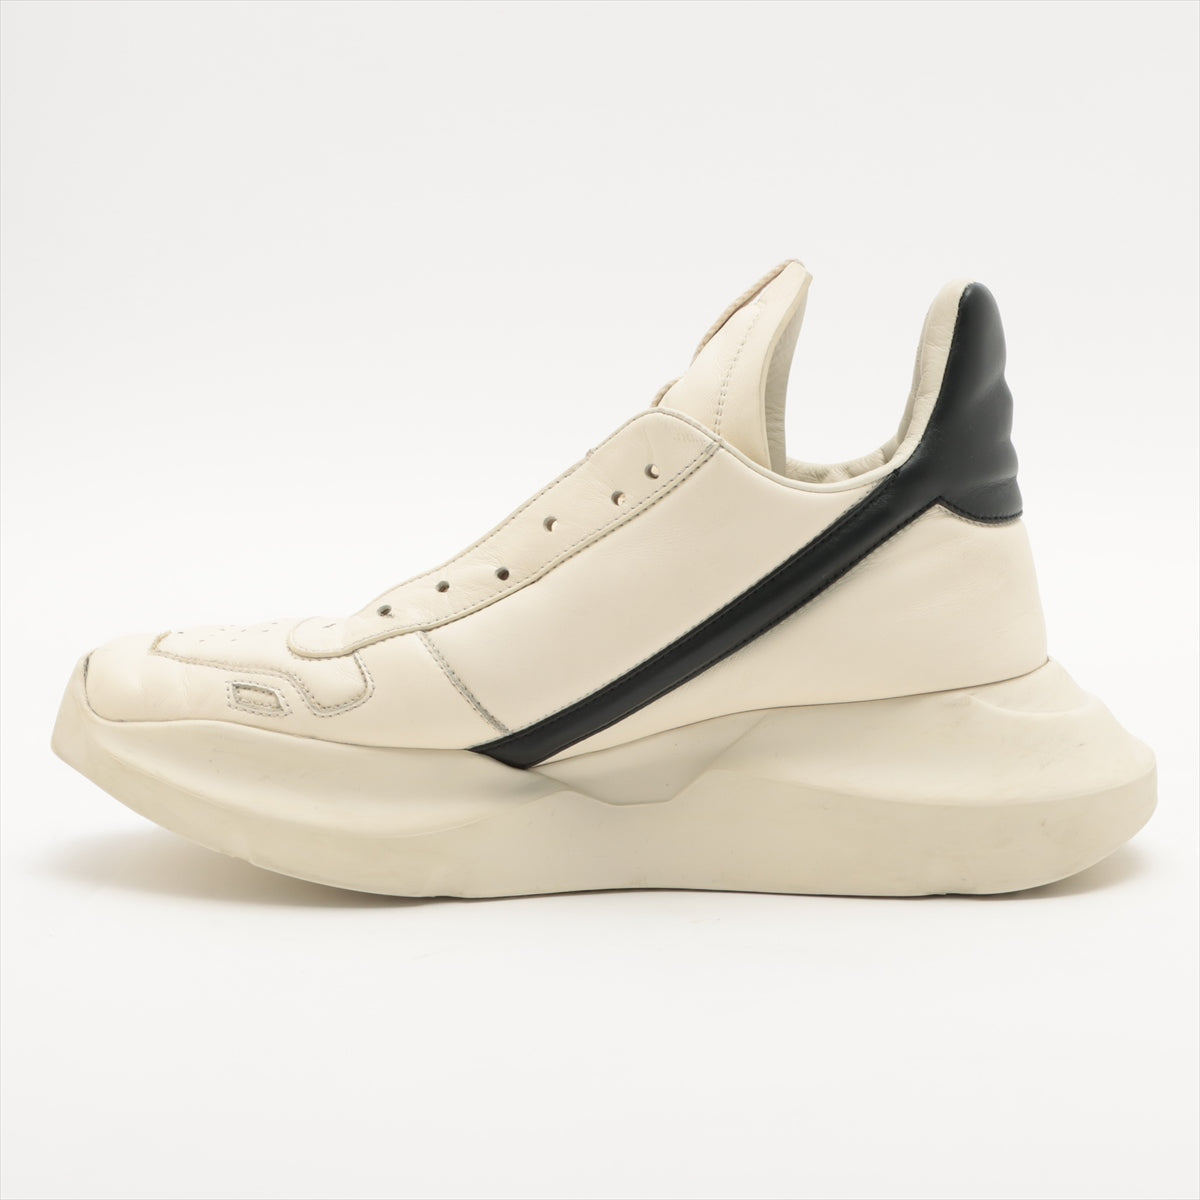 Rick Owens Leather High-top Sneakers 41 Men's Black x ivory 01C4814 Guess Runner